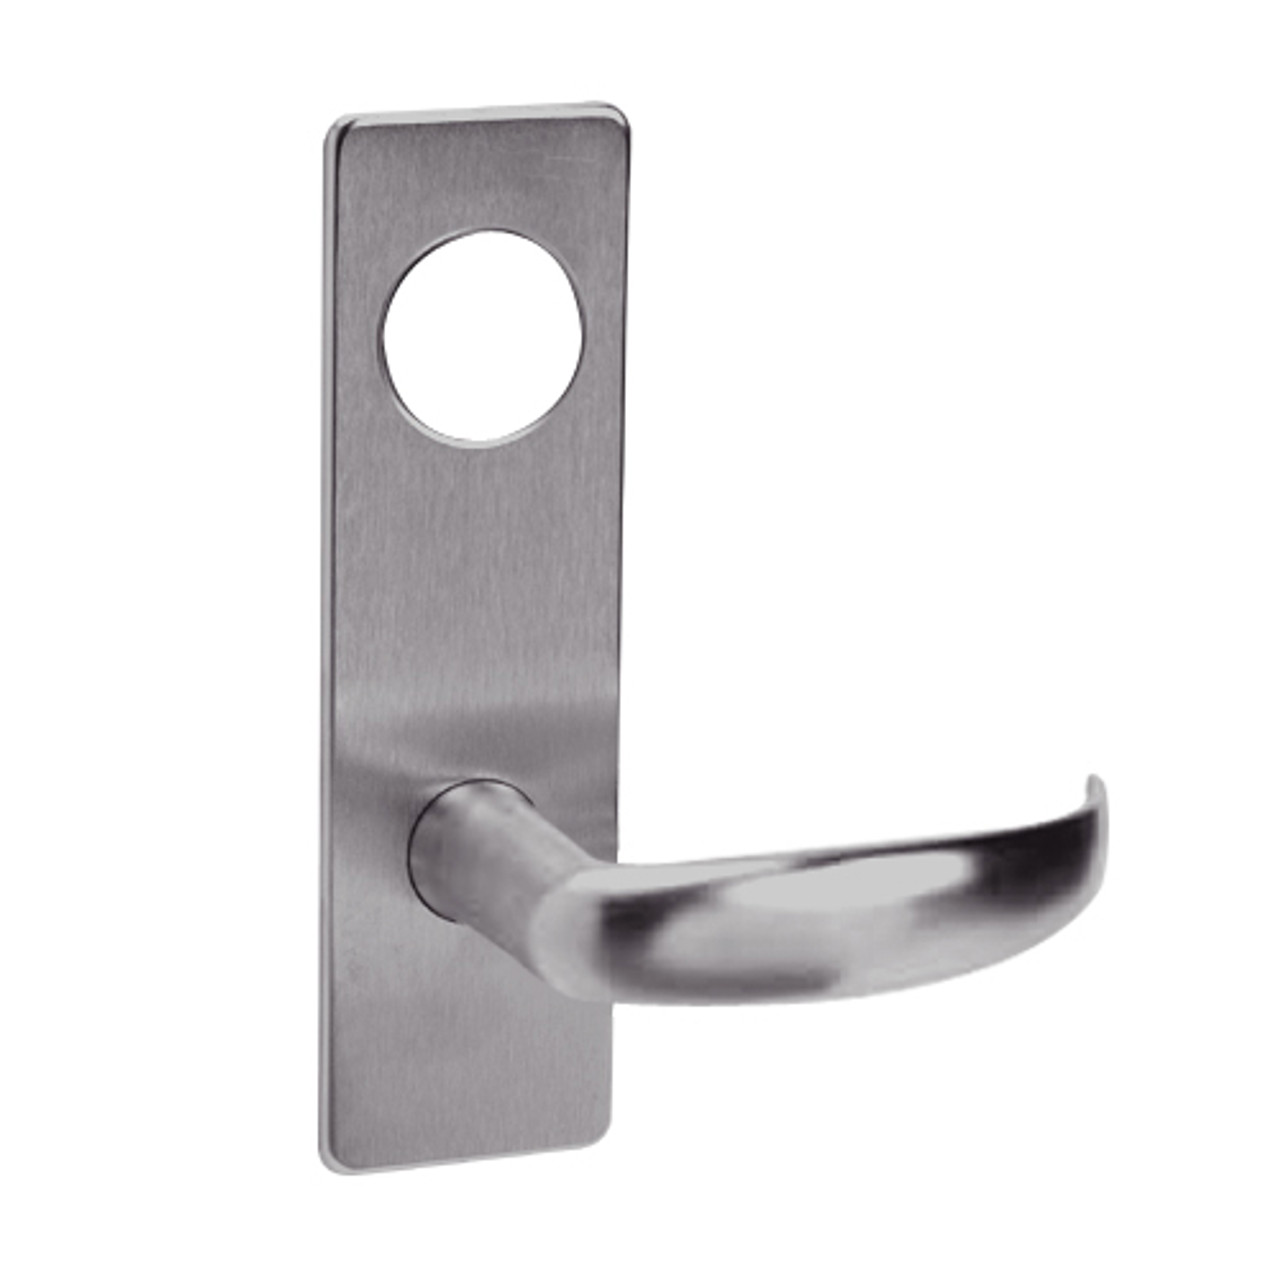 ML2048-PSM-630-M31 Corbin Russwin ML2000 Series Mortise Entrance Trim Pack with Princeton Lever in Satin Stainless